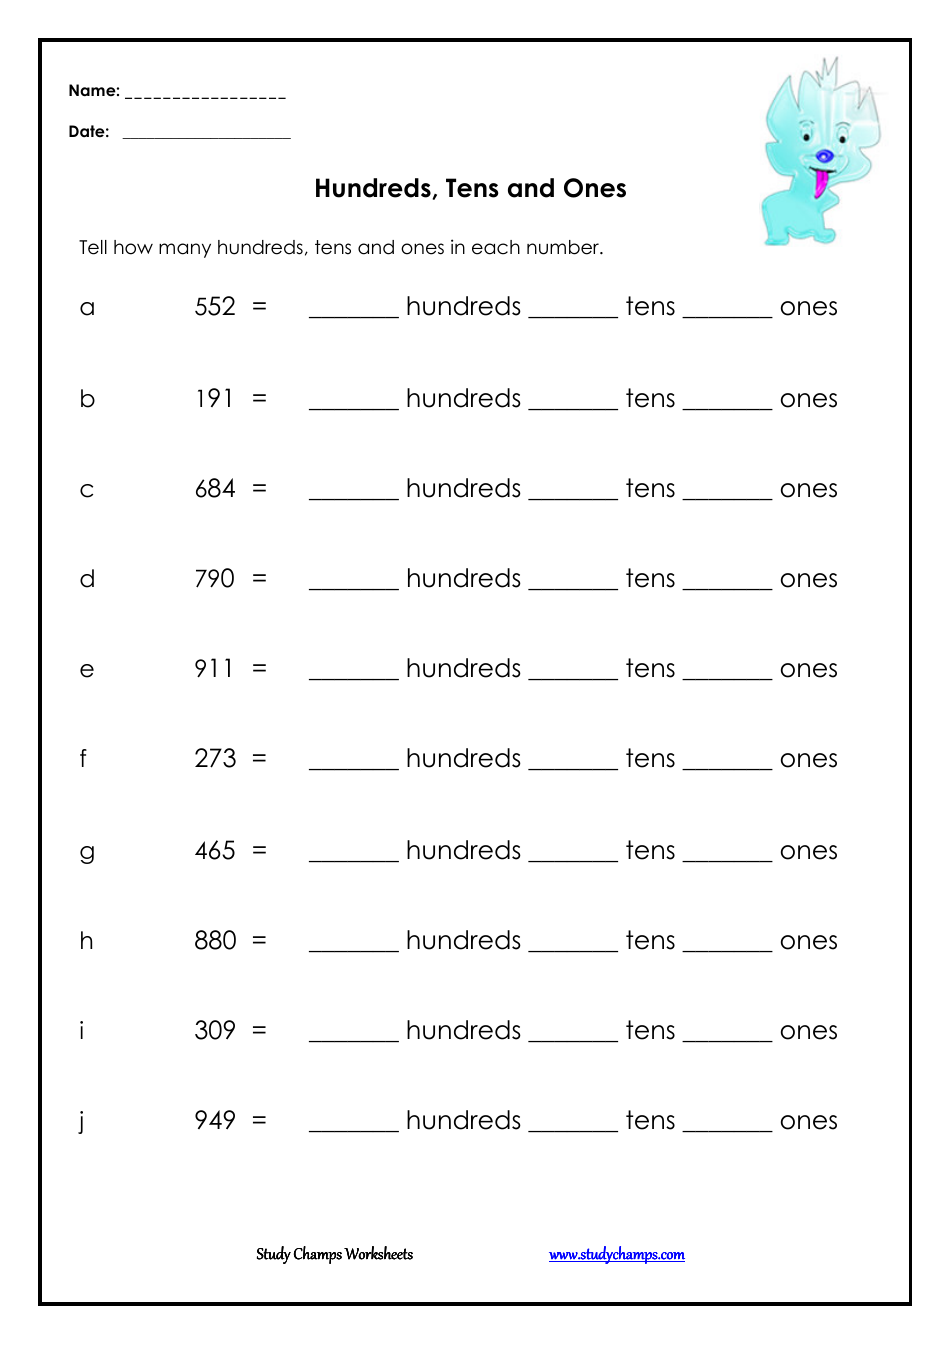 hundreds-tens-and-ones-worksheet-with-answer-key-download-printable-pdf-templateroller